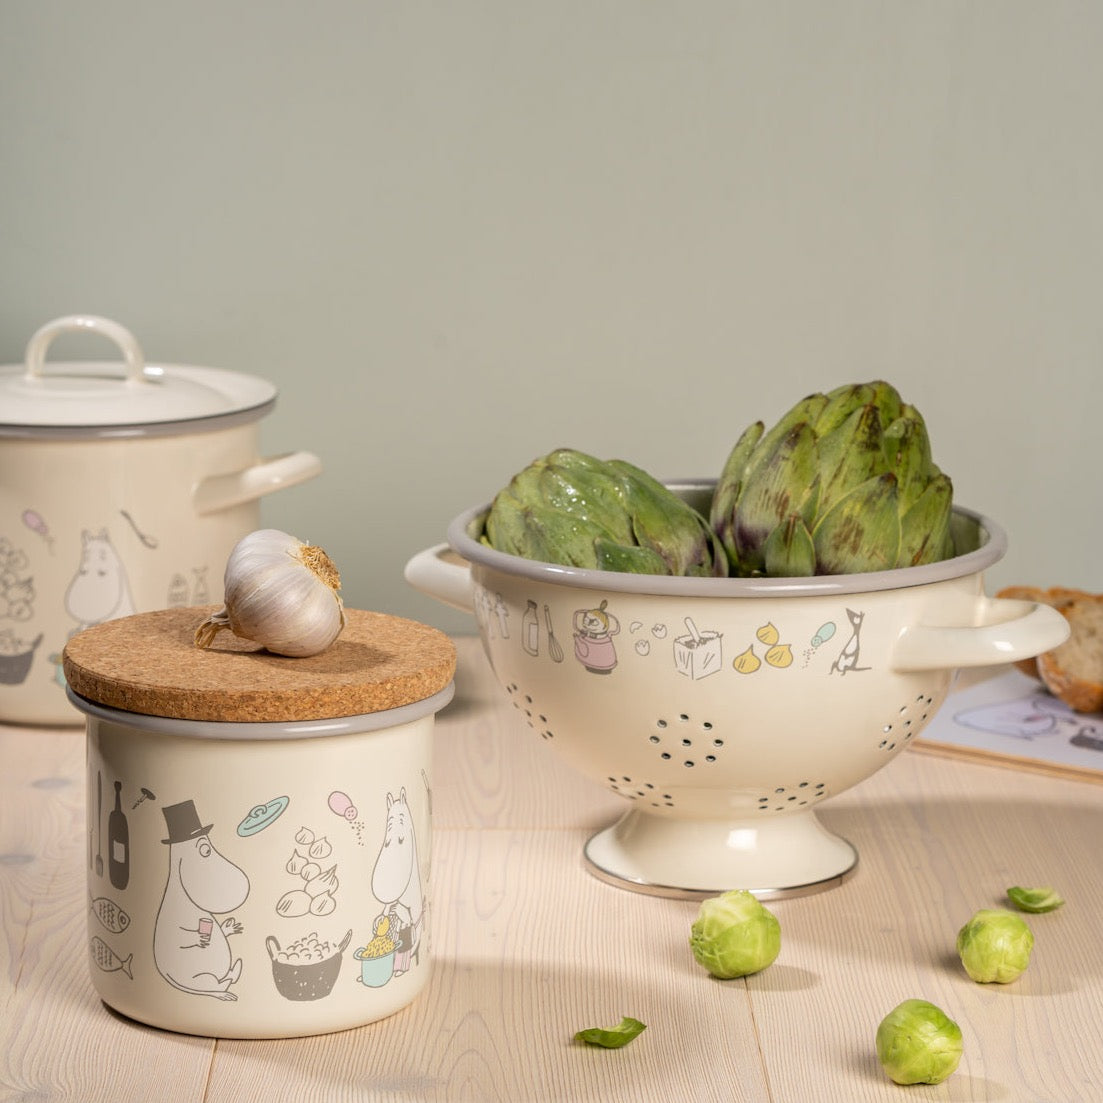 Bon Appétit Cookware with Moomin by Muurla 